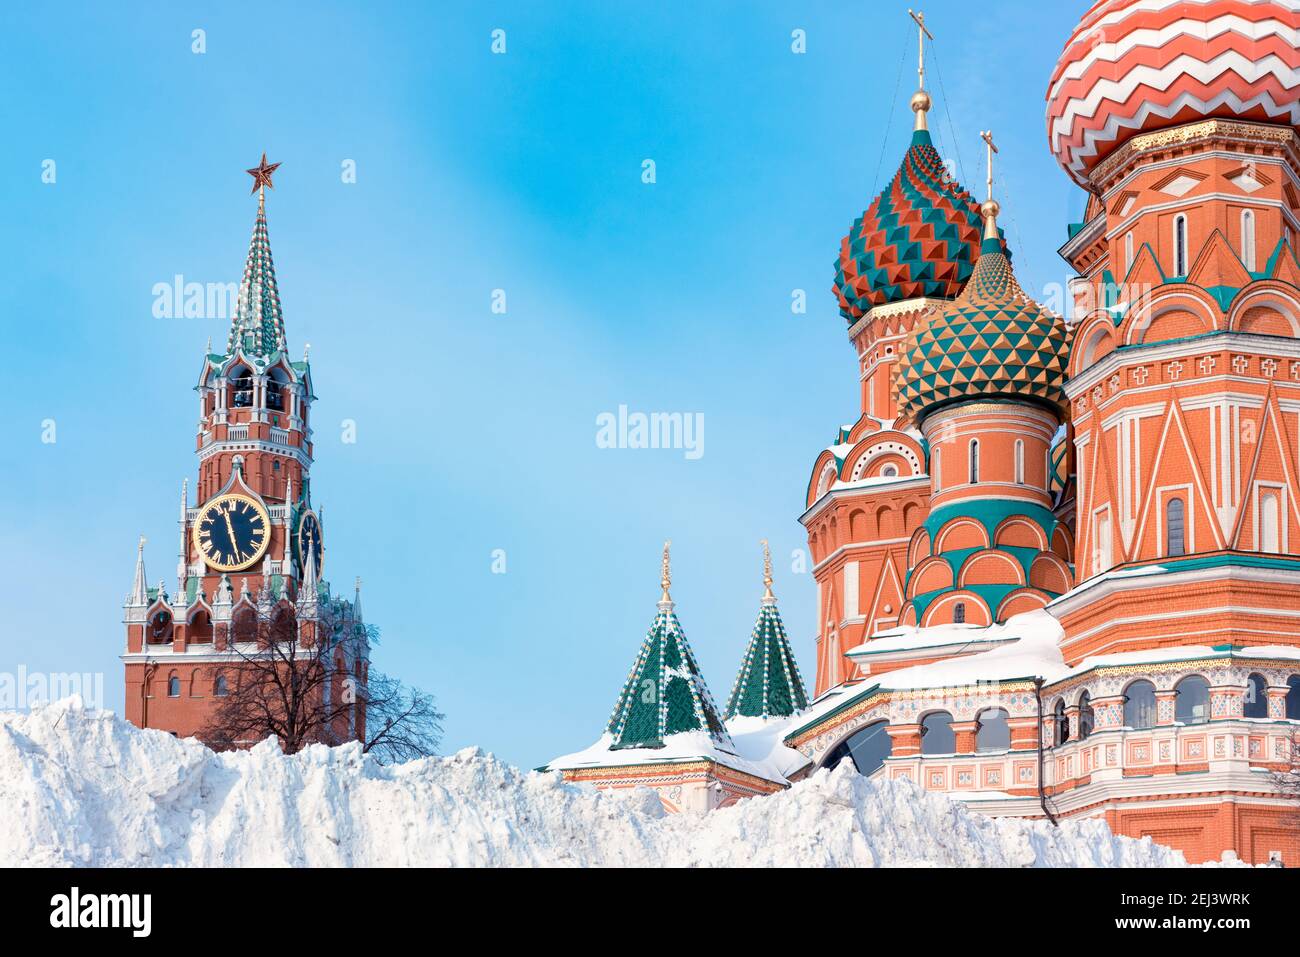 Snow pile near St. Basil's Cathedral and Spasskaya tower, winter in Moscow, Russia. Stock Photo